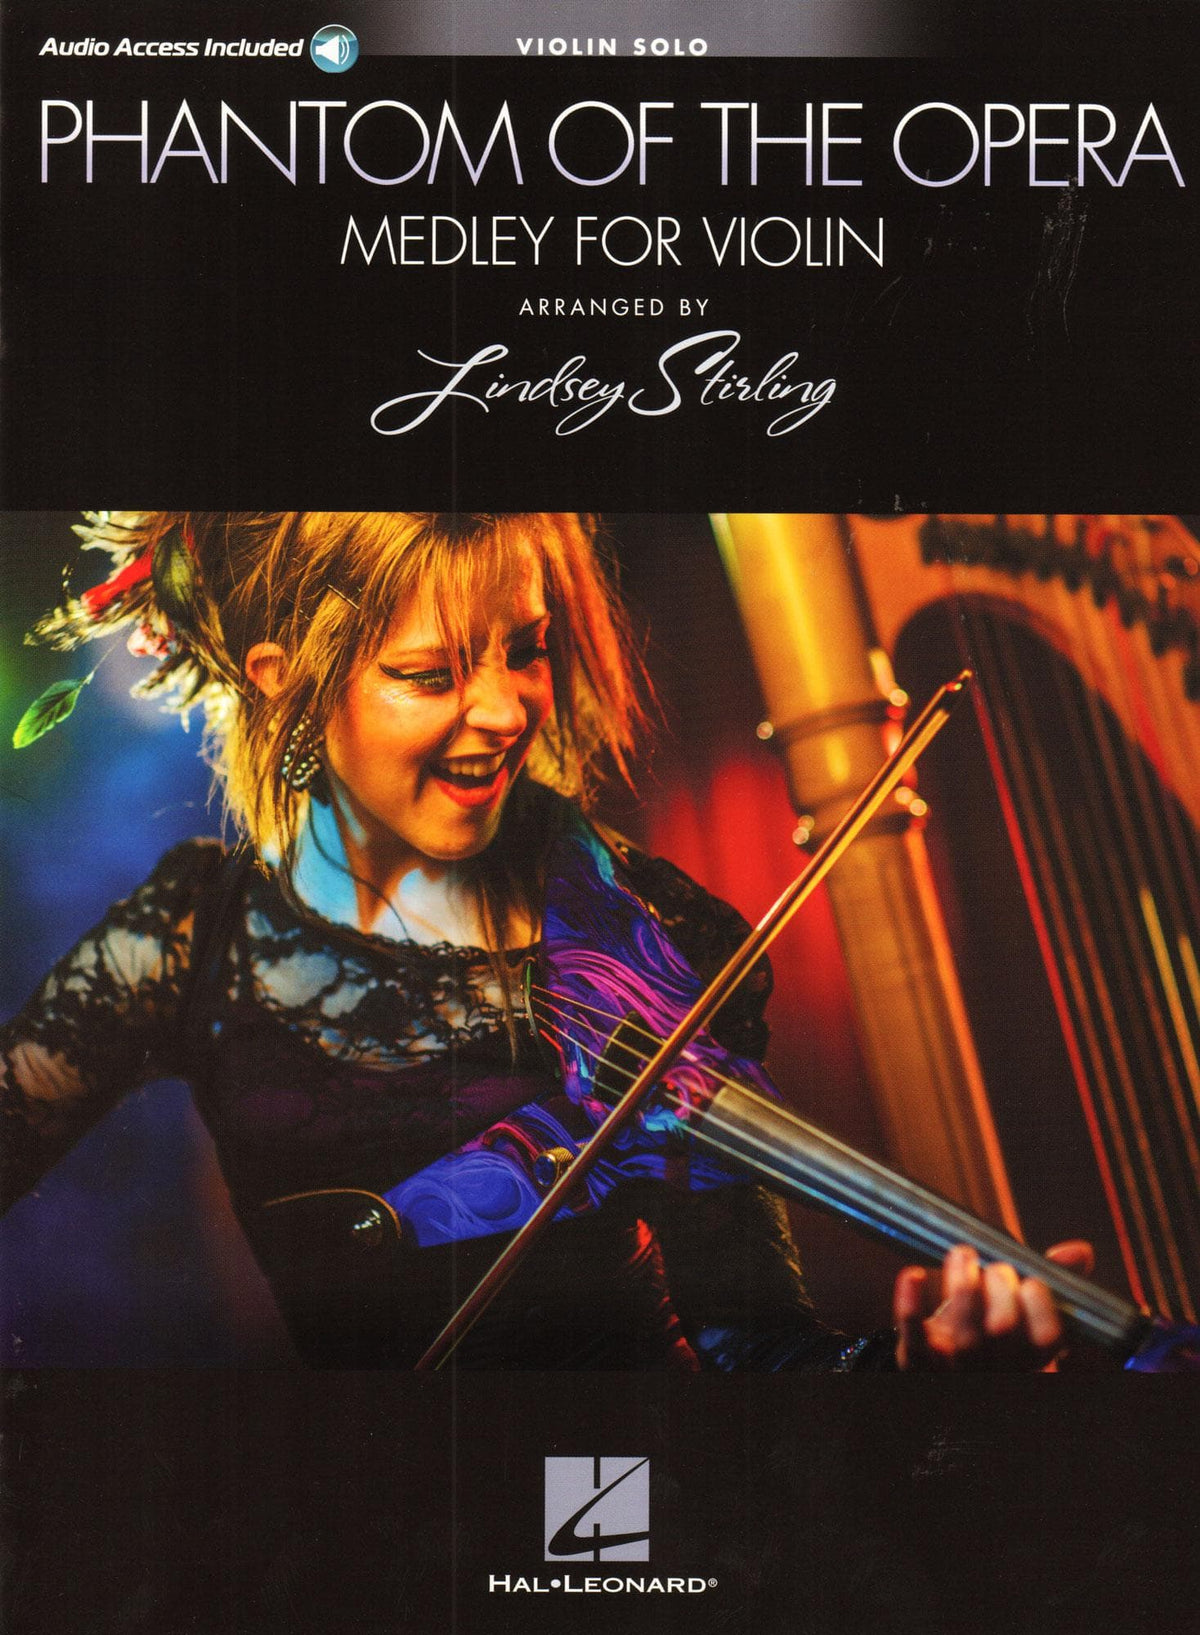 Phantom Of The Opera - Medley for Violin with Audio Accompaniment - arranged by Lindsey Stirling - Hal Leonard